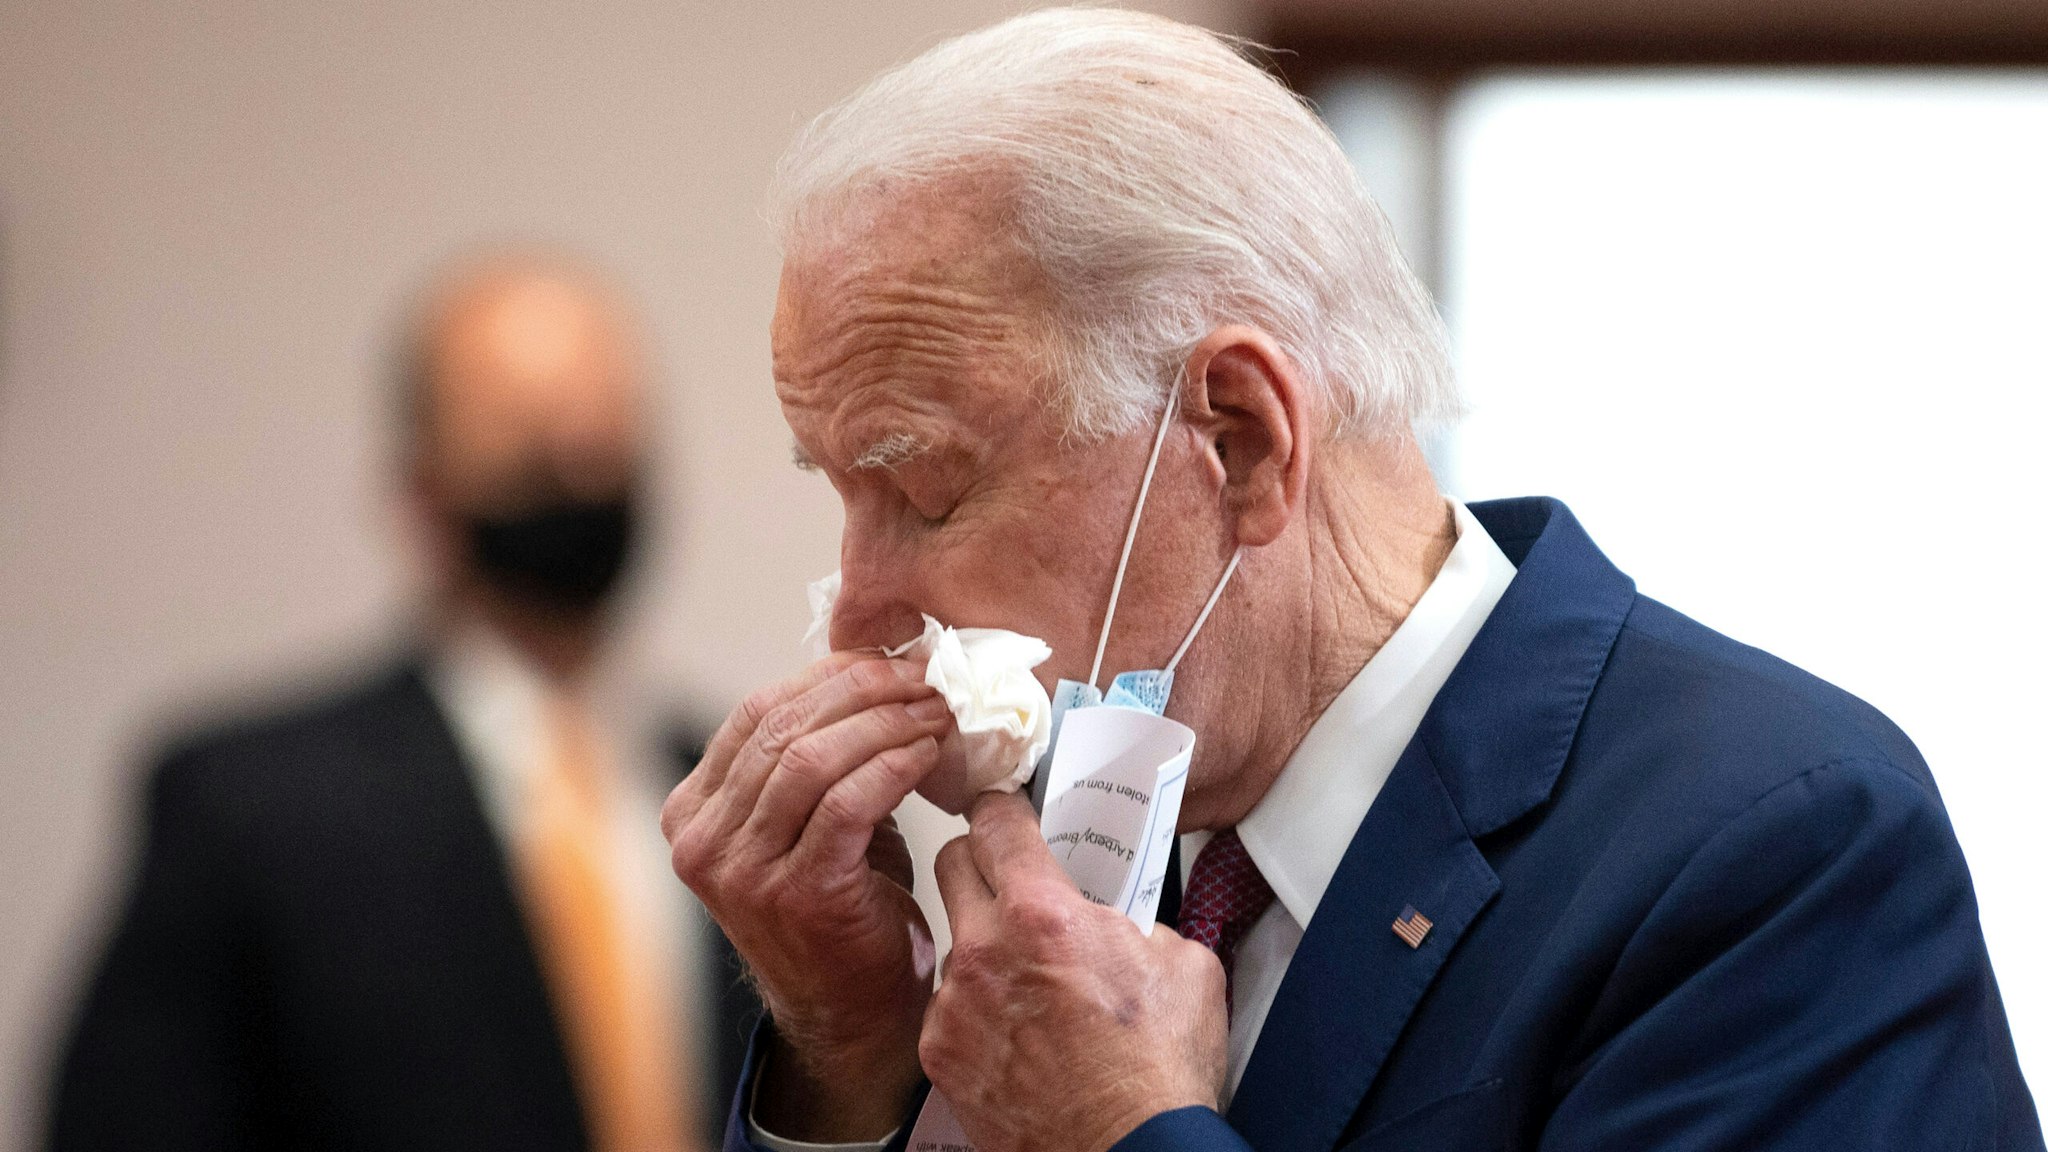 Former vice president and Democratic presidential candidate Joe Biden uses a tissue as he meets with clergy members and community activists during a visit to Bethel AME Church in Wilmington, Delaware on June 1, 2020. - Democratic presidential candidate Joe Biden visited the scene of an anti-racism protest in the state of Delaware on May 31, 2020, saying that the United States was "in pain". "We are a nation in pain right now, but we must not allow this pain to destroy us," Biden wrote in Twitter, posting a picture of him speaking with a black family at the cordoned-off site where a protesters had gathered on Saturday night.